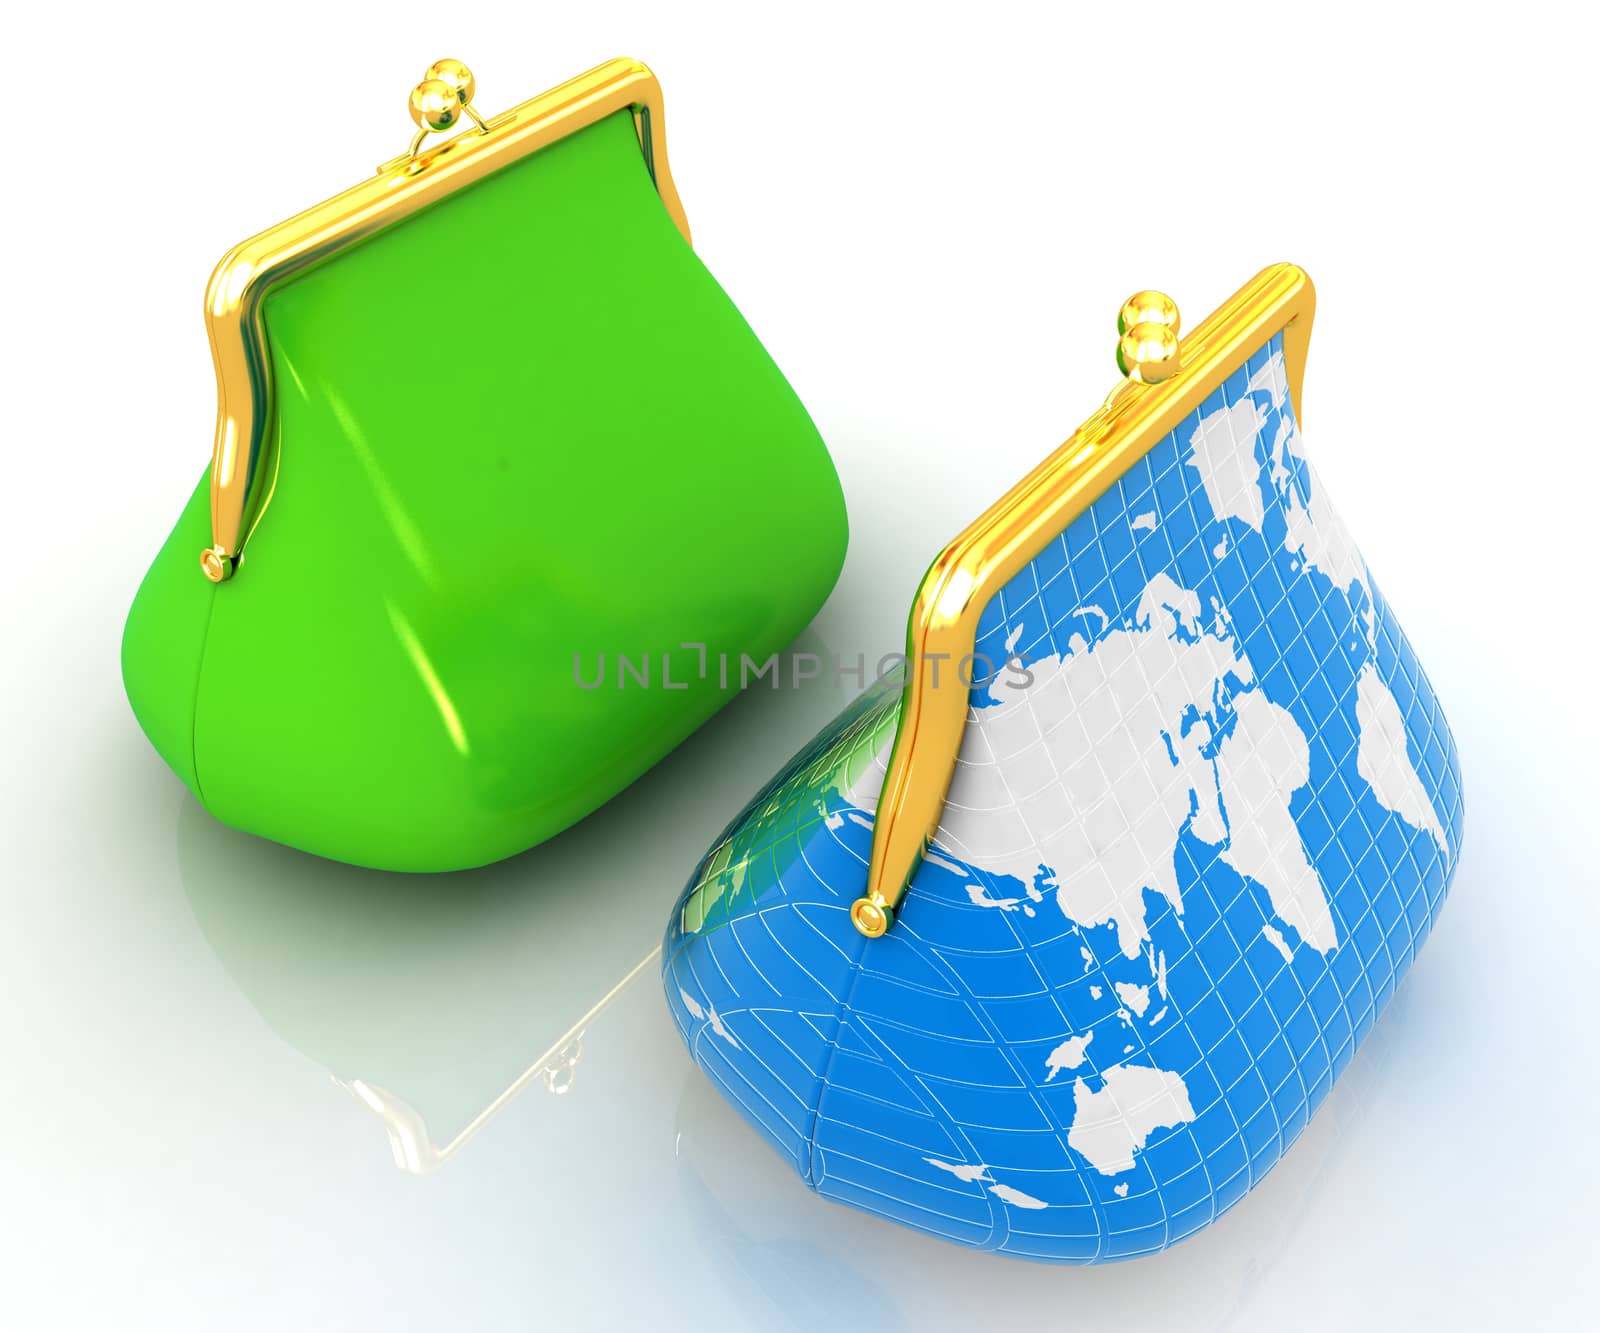 Purse Earth and purses. On-line concept on a white background